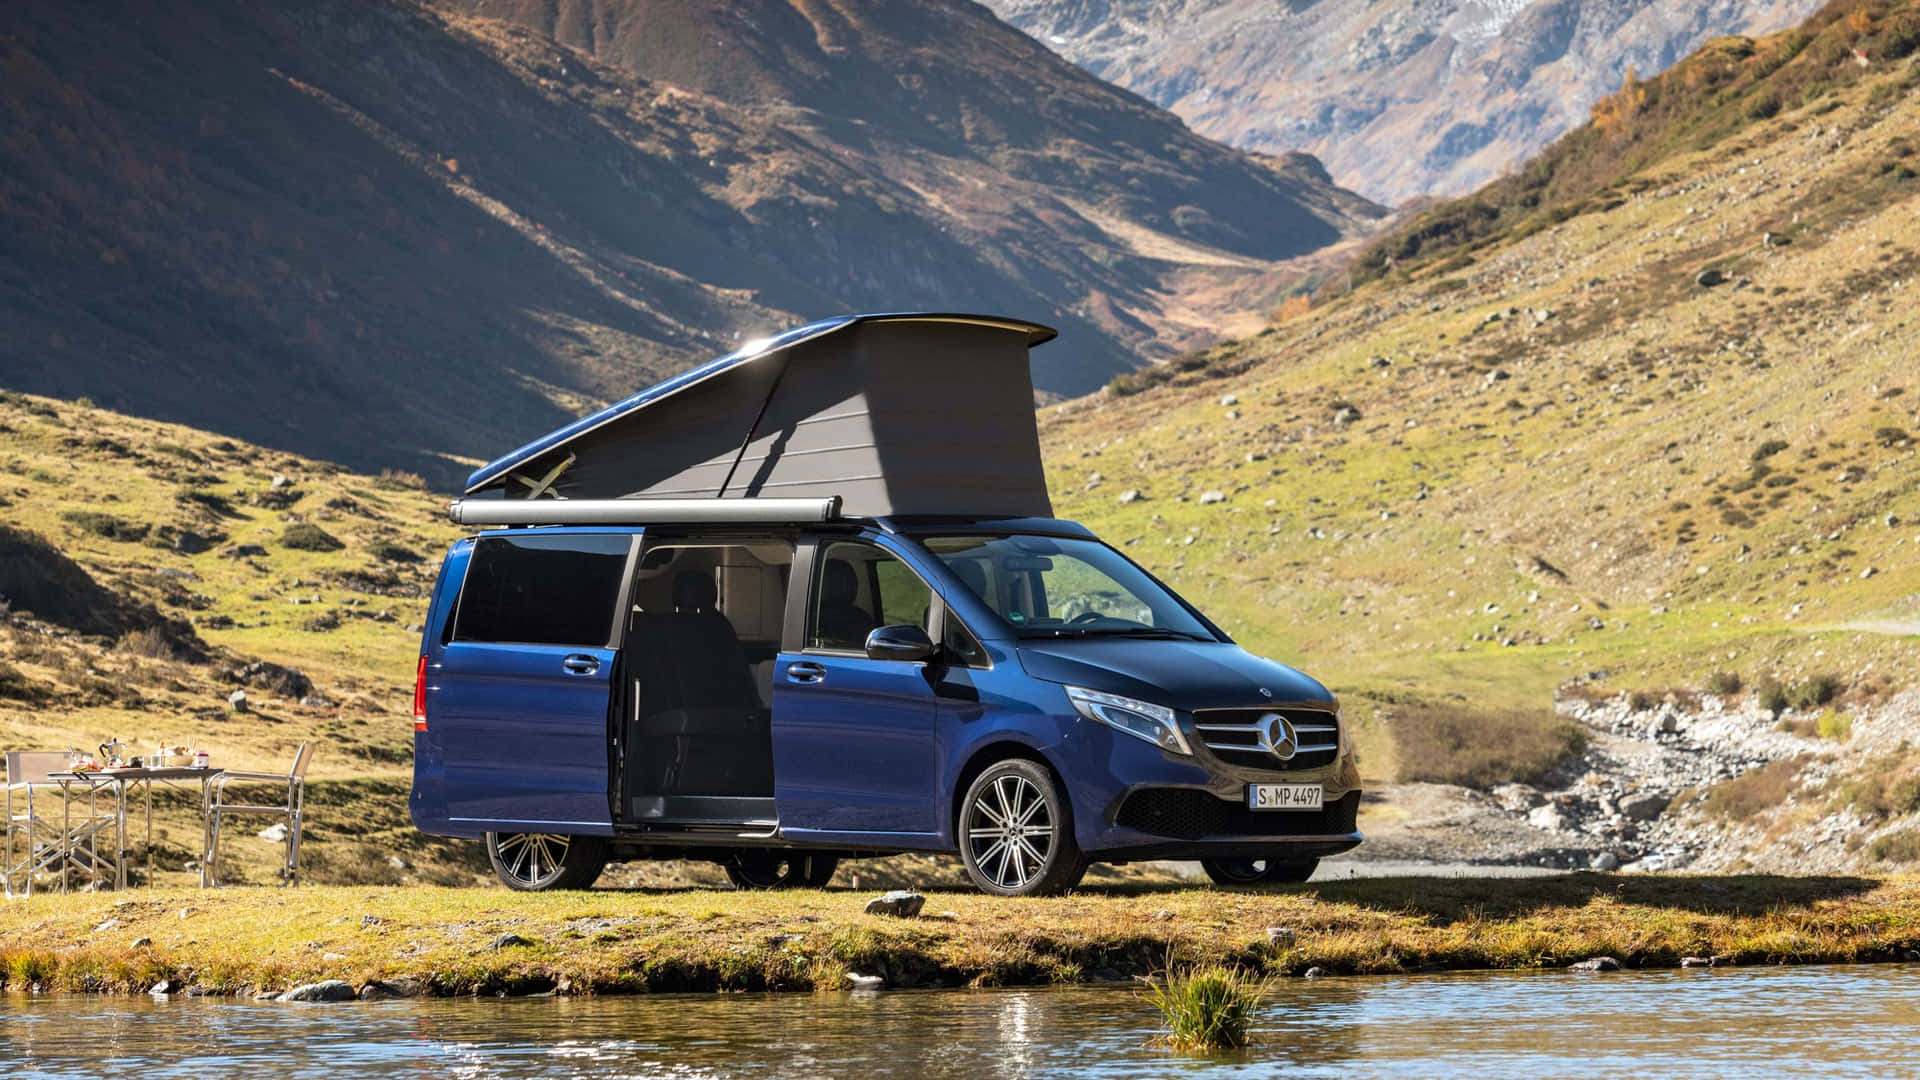 Caprion: Mercedes Benz V-class - The Epitome Of Luxury And Comfort Wallpaper